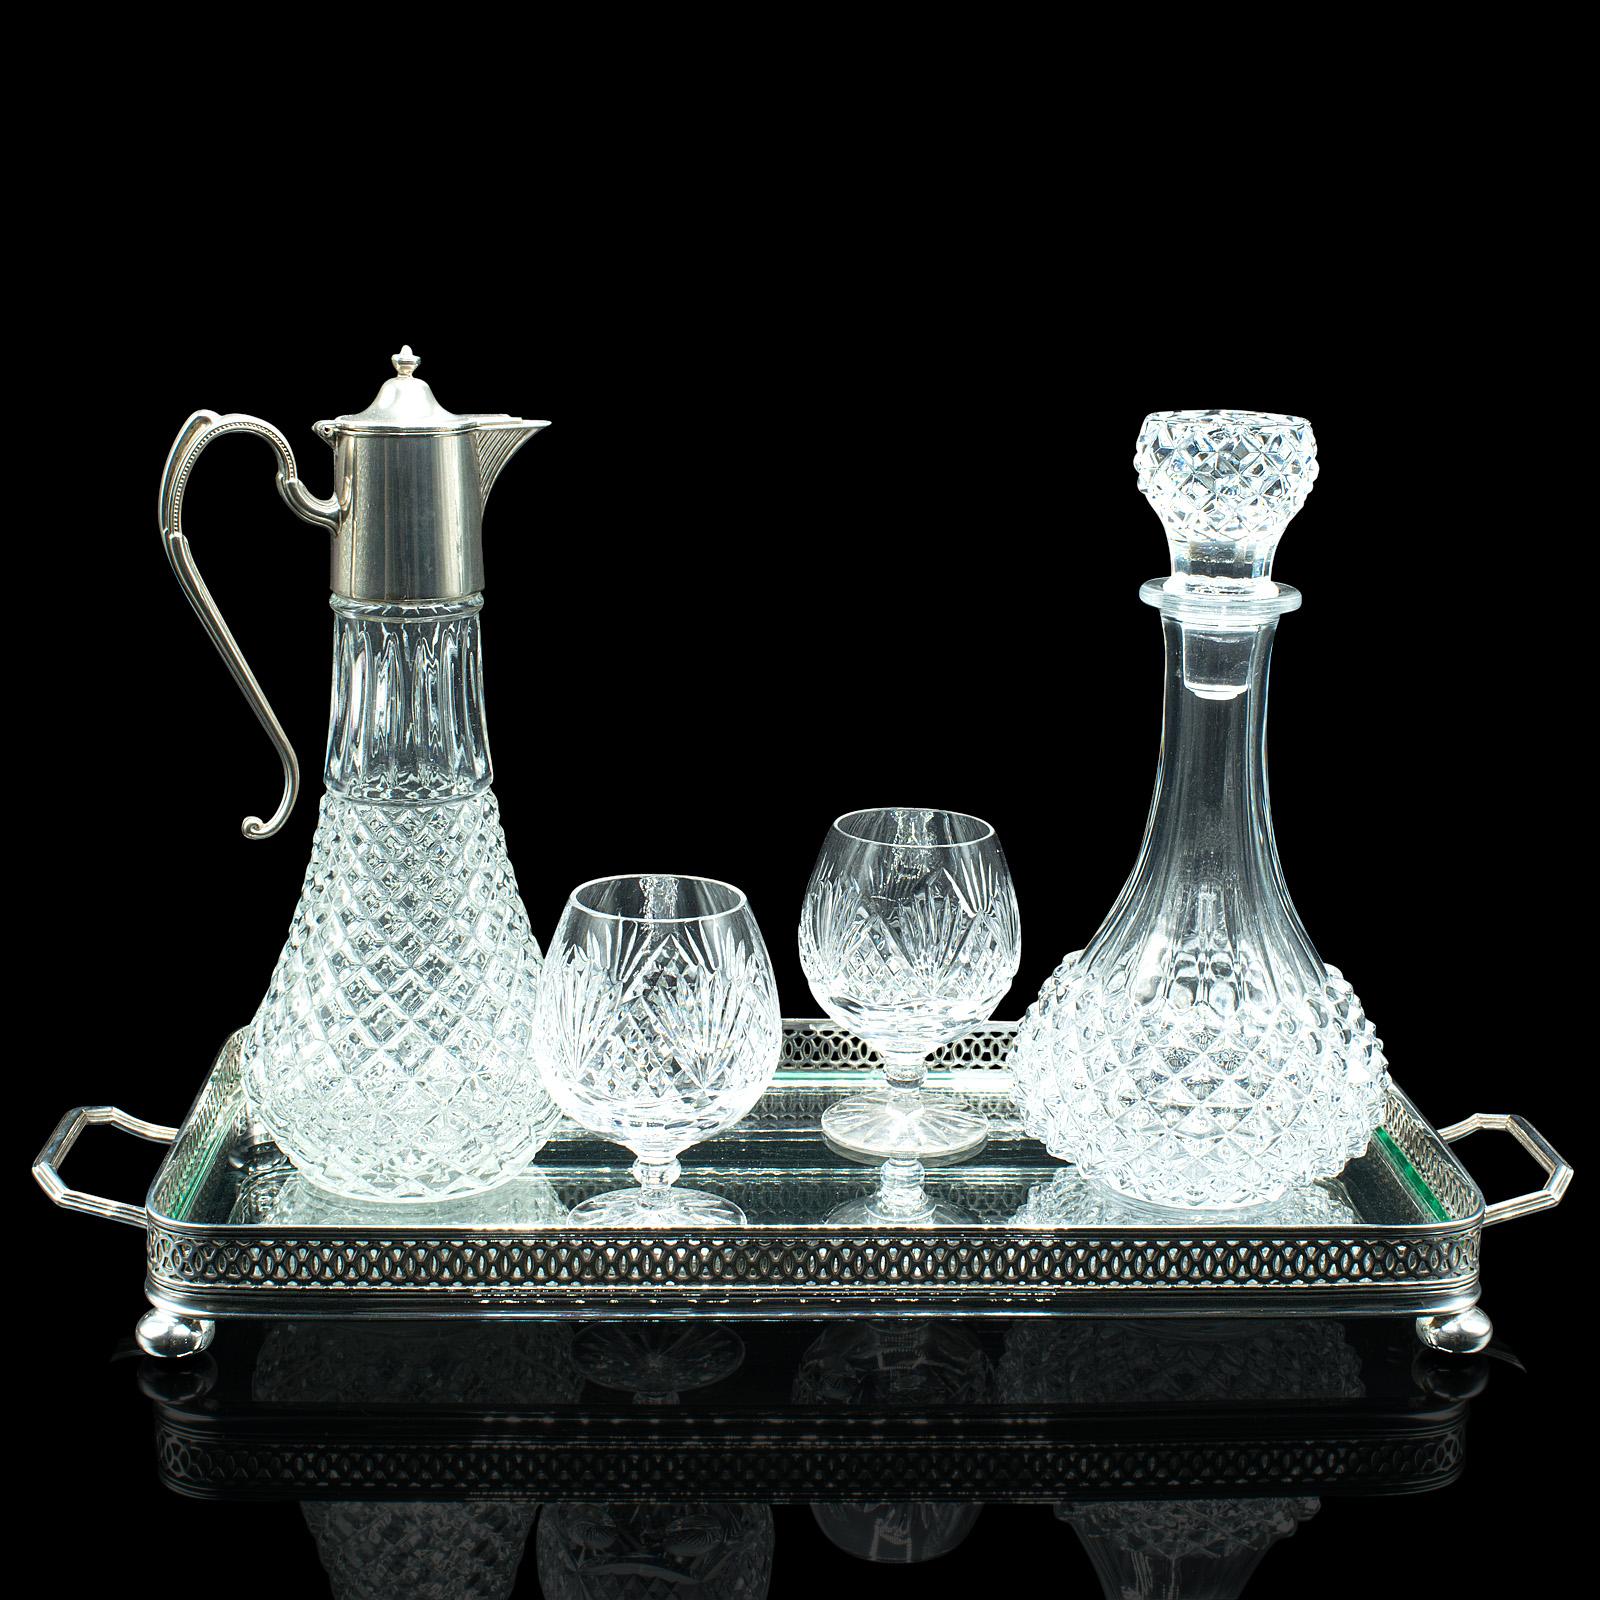 This is a vintage duet spirits tray. An English, glass and silver plate serving tray with decanters and glasses, dating to the late 20th century, circa 1970.

Striking gallery tray and cut glass service for two
Displays a desirable aged patina